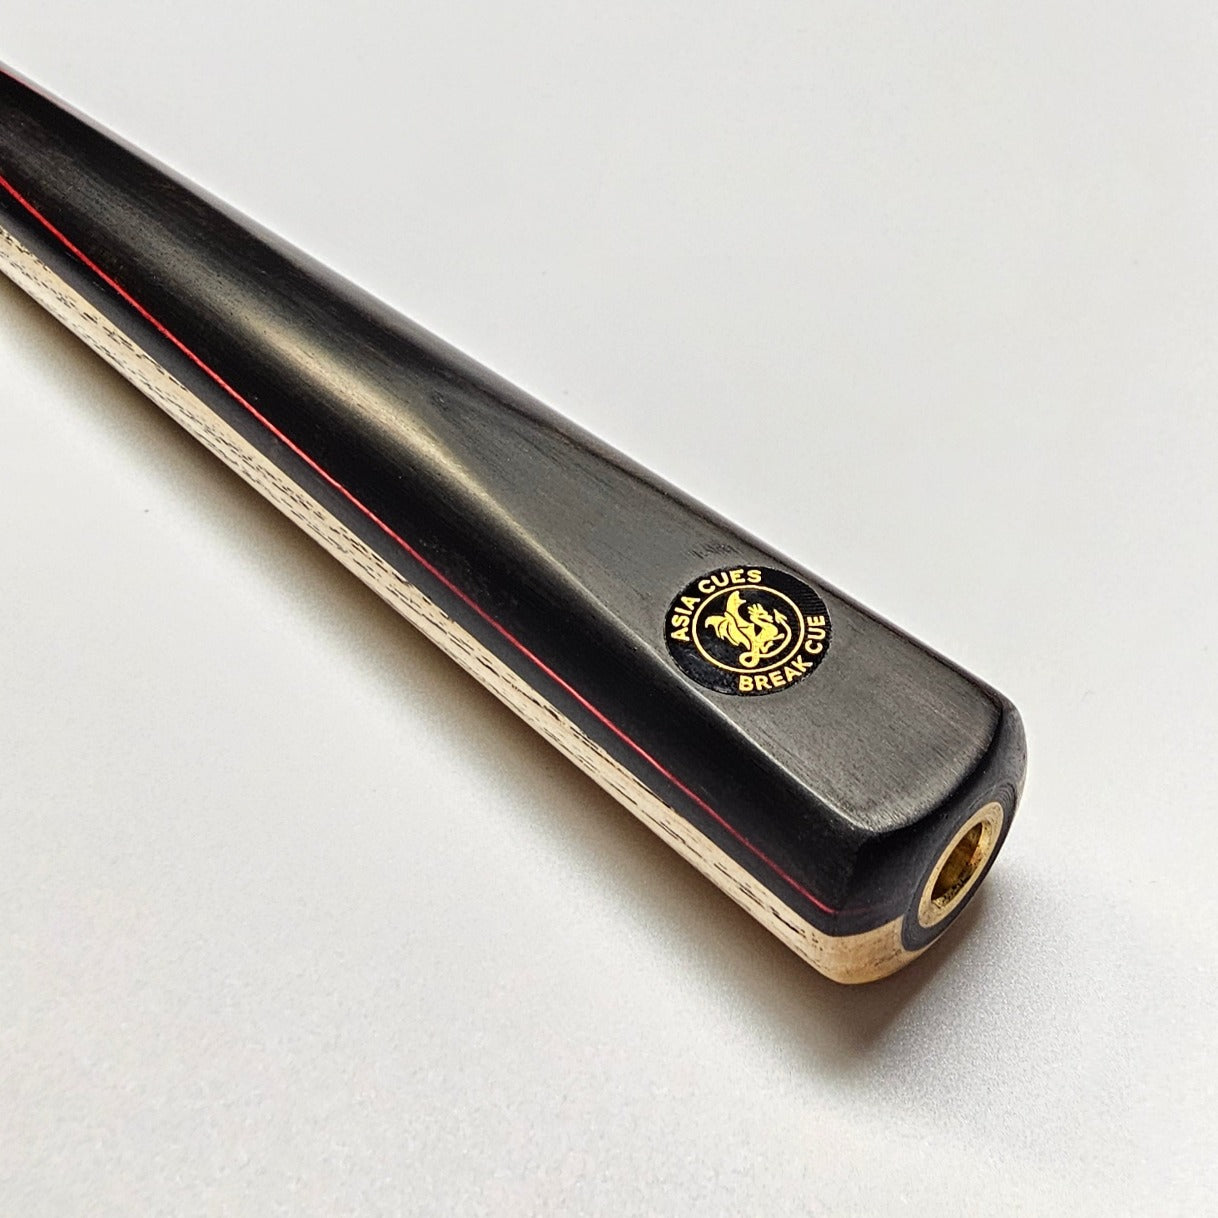 Asia Cues 3/4 Jointed Ash Ebony with Red Veneer badge view